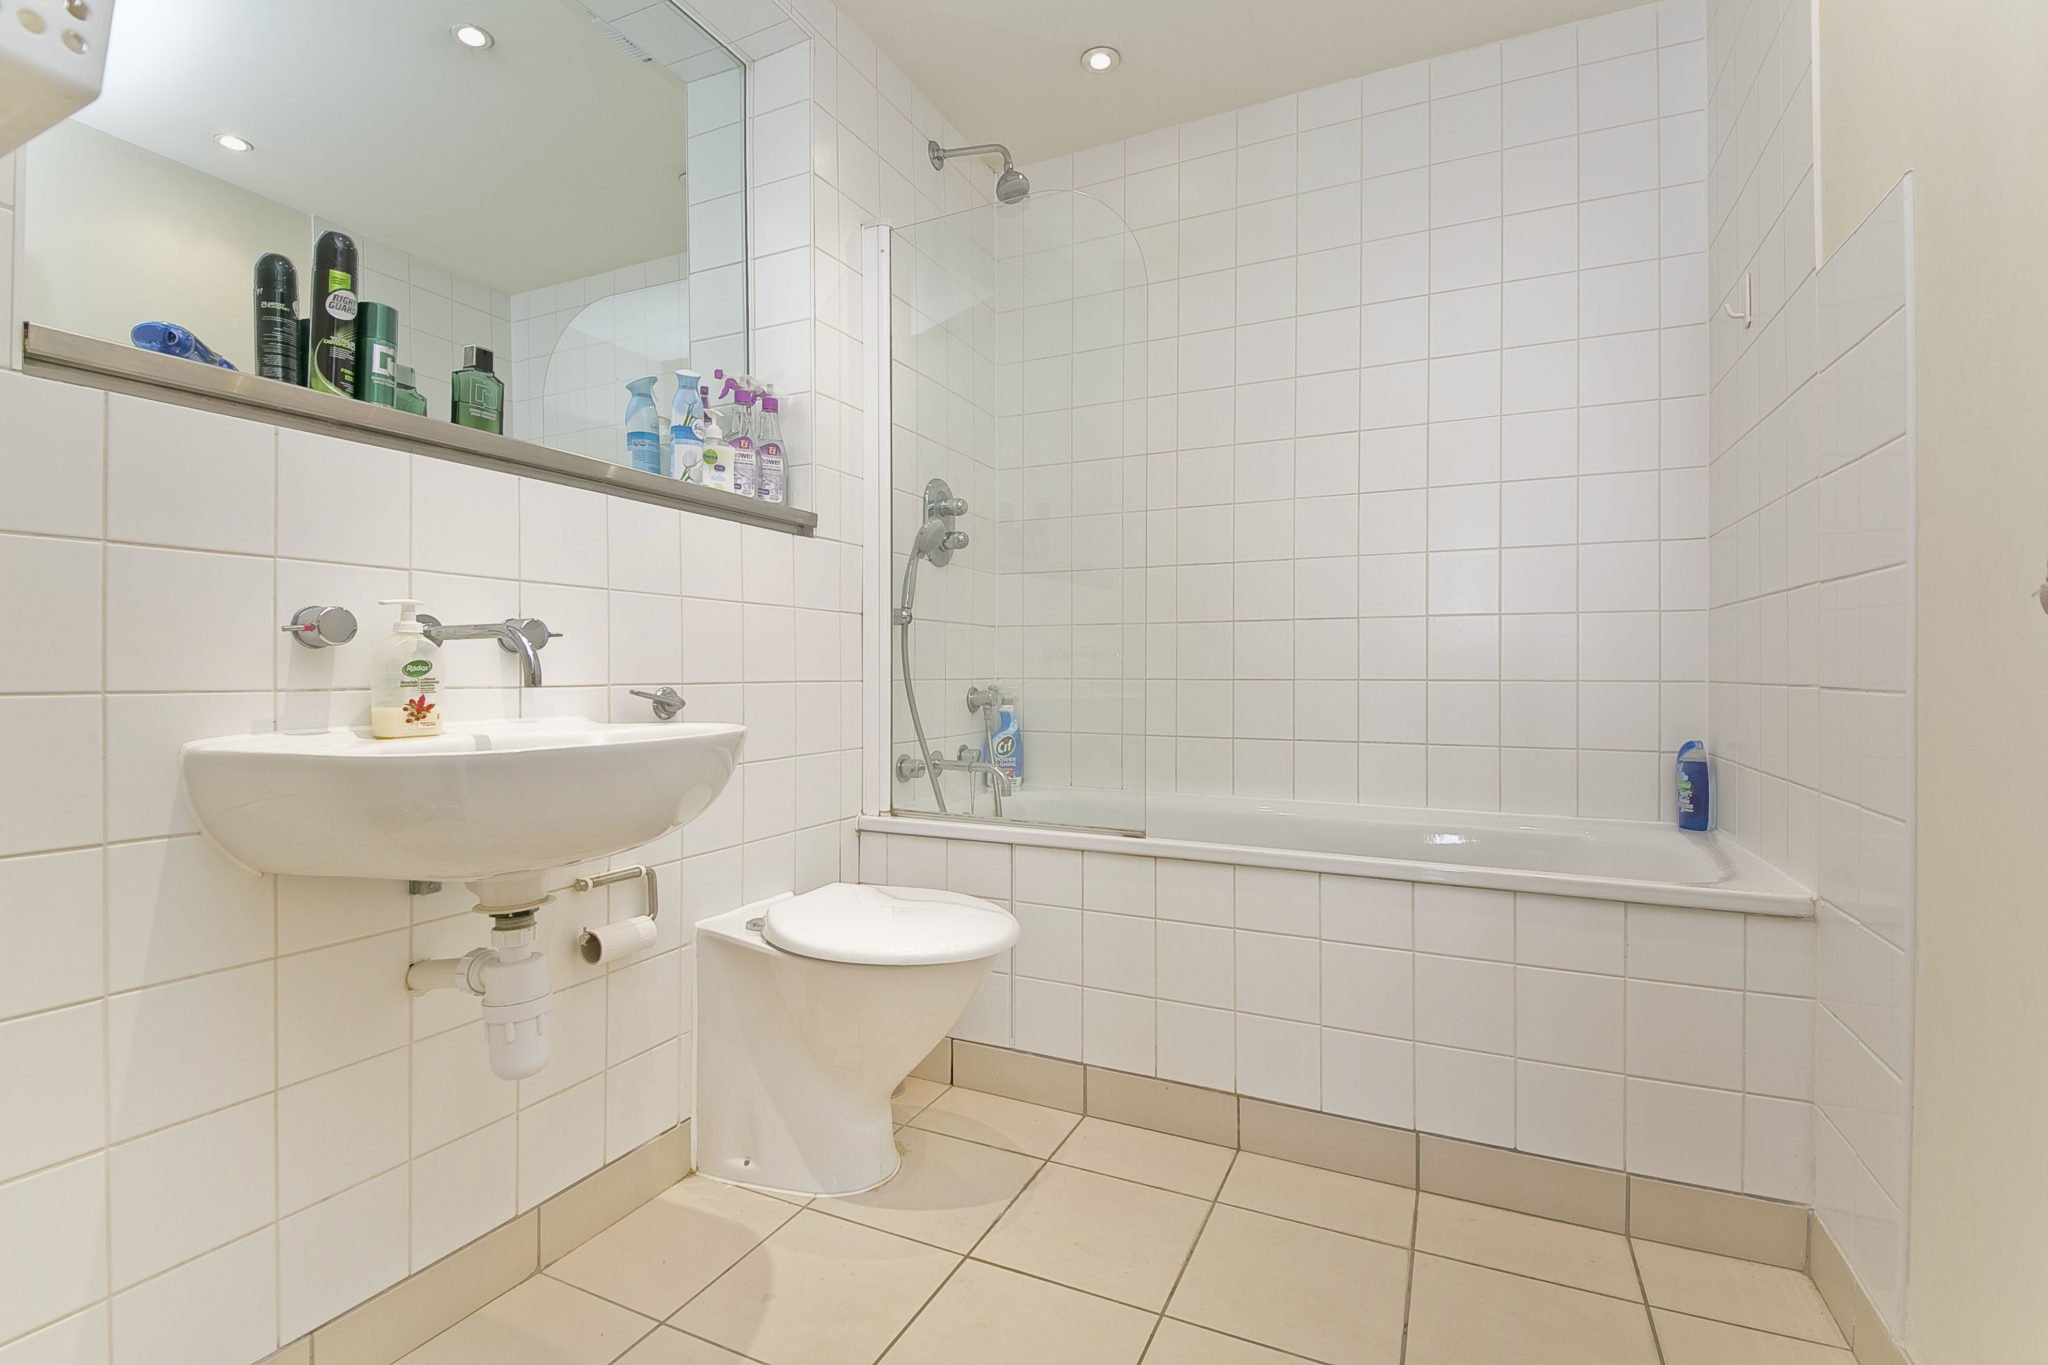 Serviced-Apartments-Central-London-|Stylish-Old-Street-Deluxe-Apartments-|-Free-Wifi-|-Fully-Equipped-Kitchen-|-Private-Balcony-|0208-6913920|-Urban-Stay